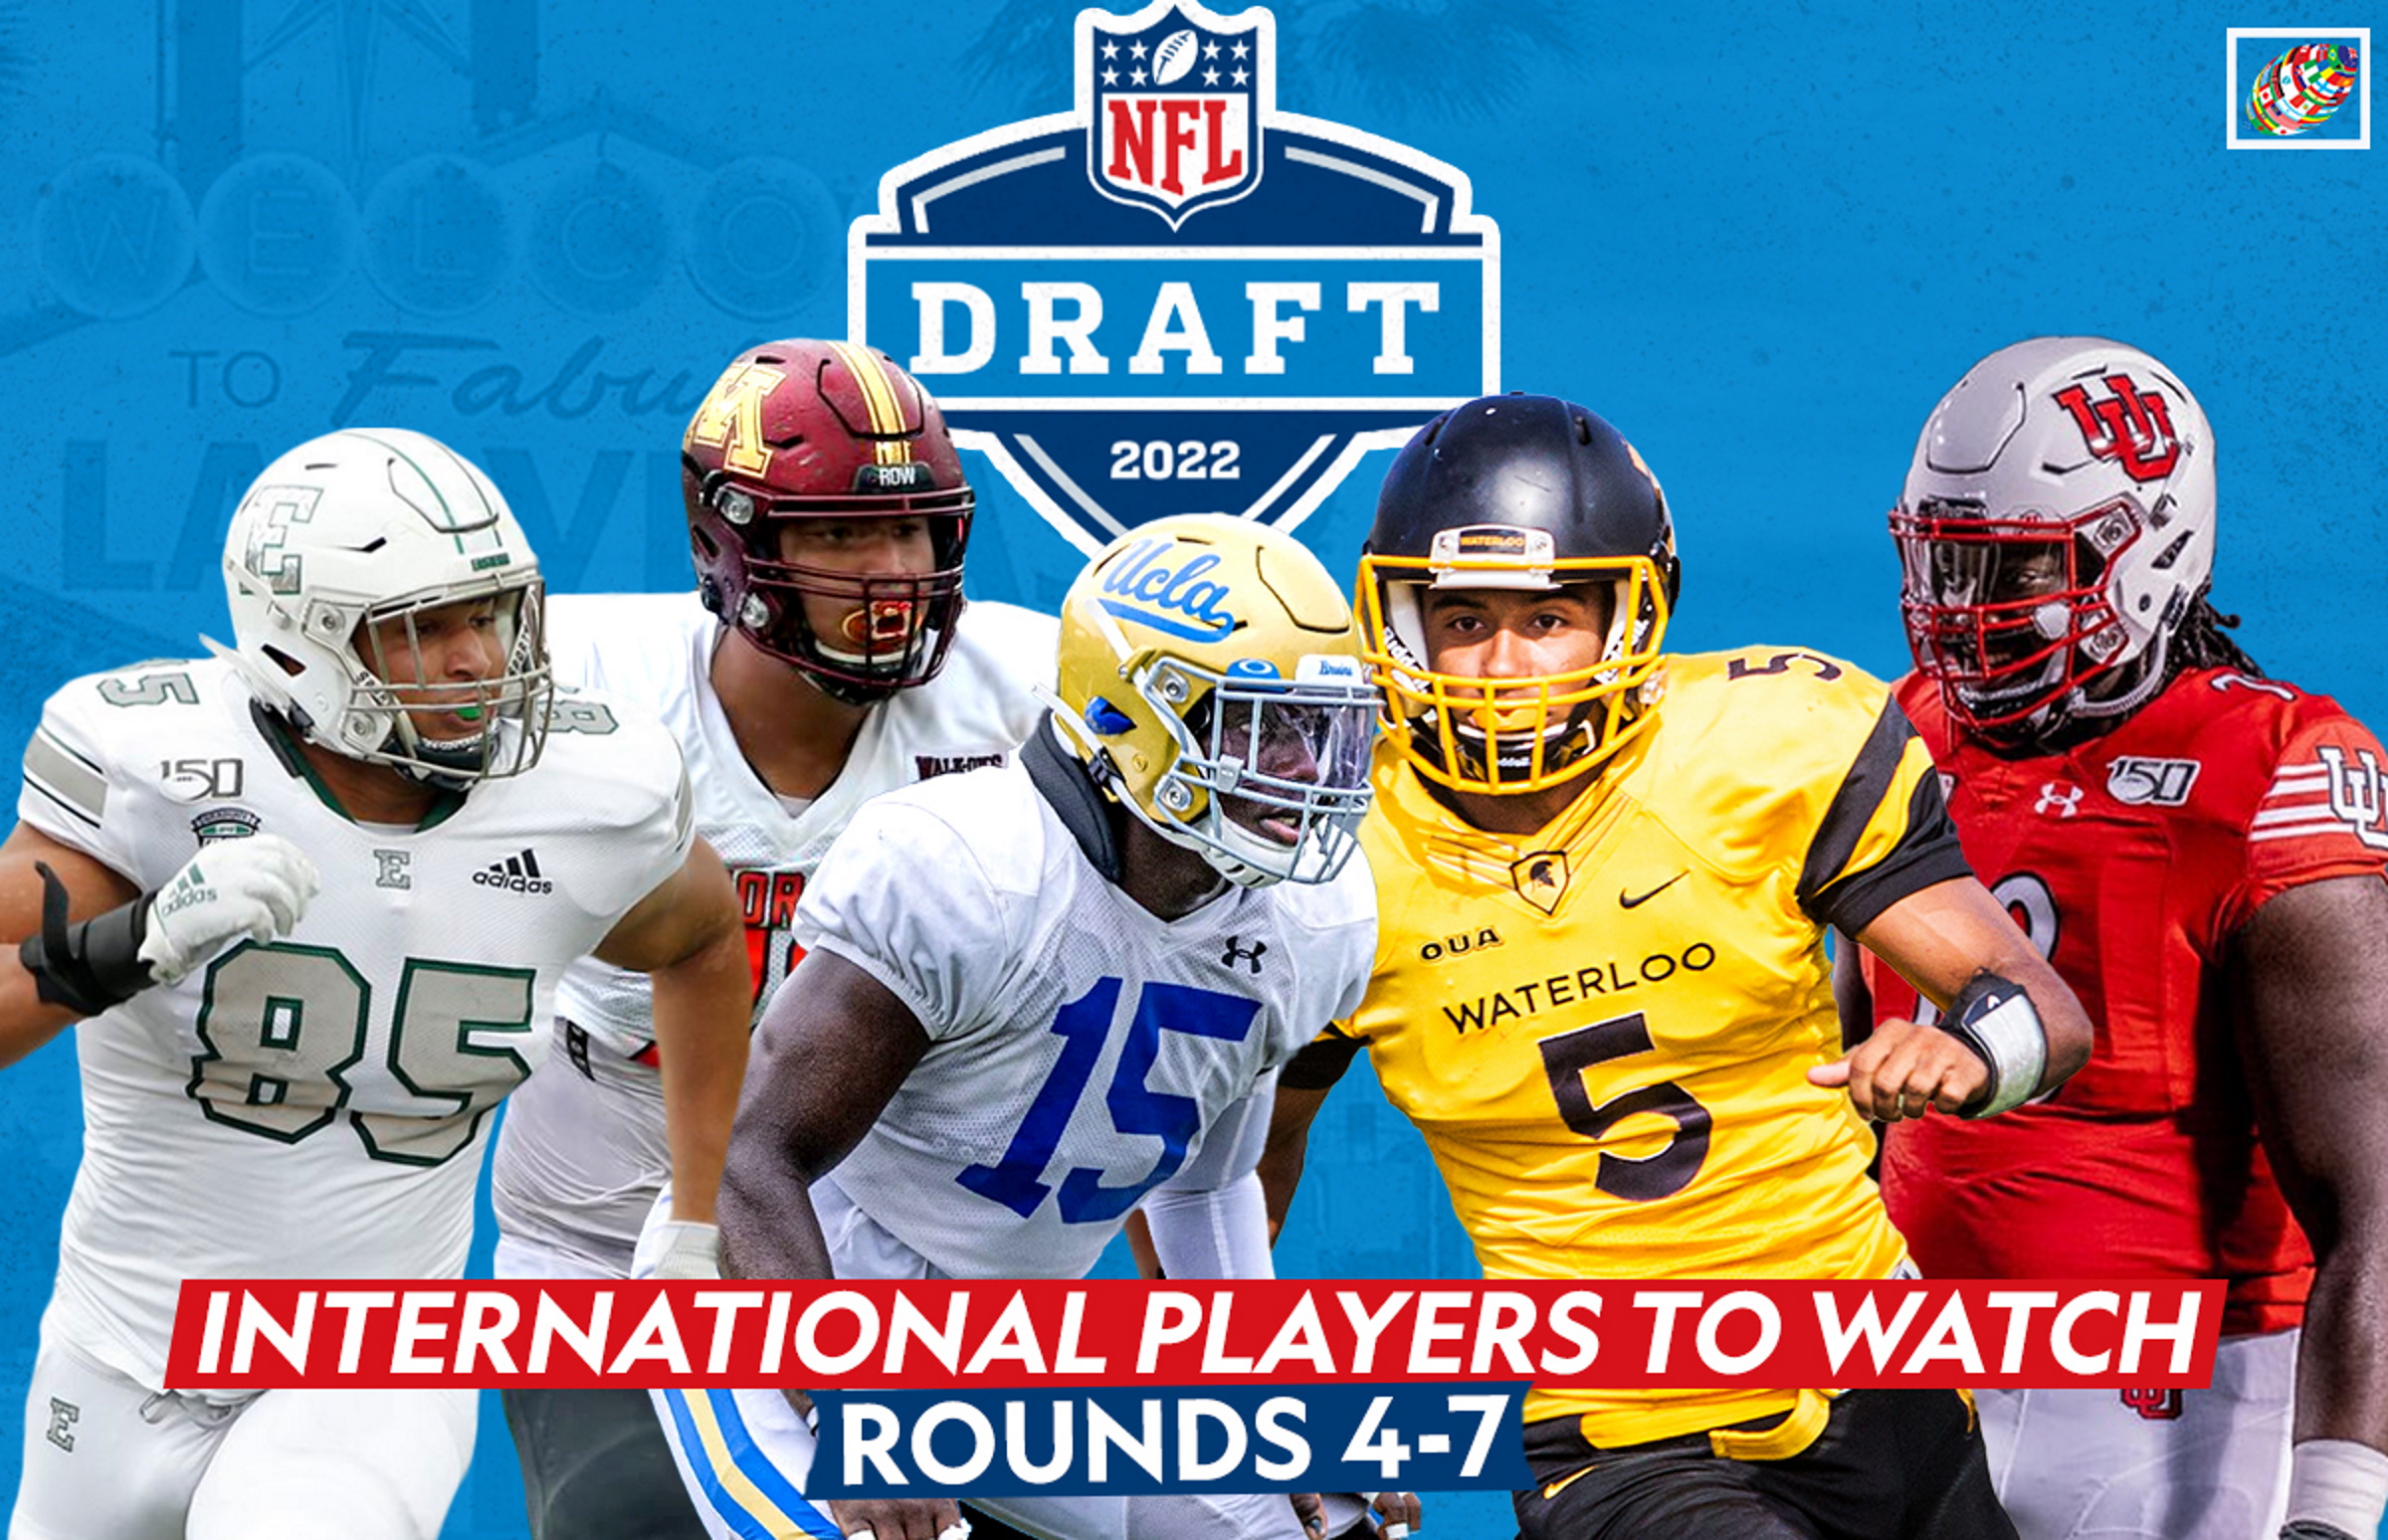 NFL Draft 2022 Day 3: International Players stay patient in the draft's  final stages